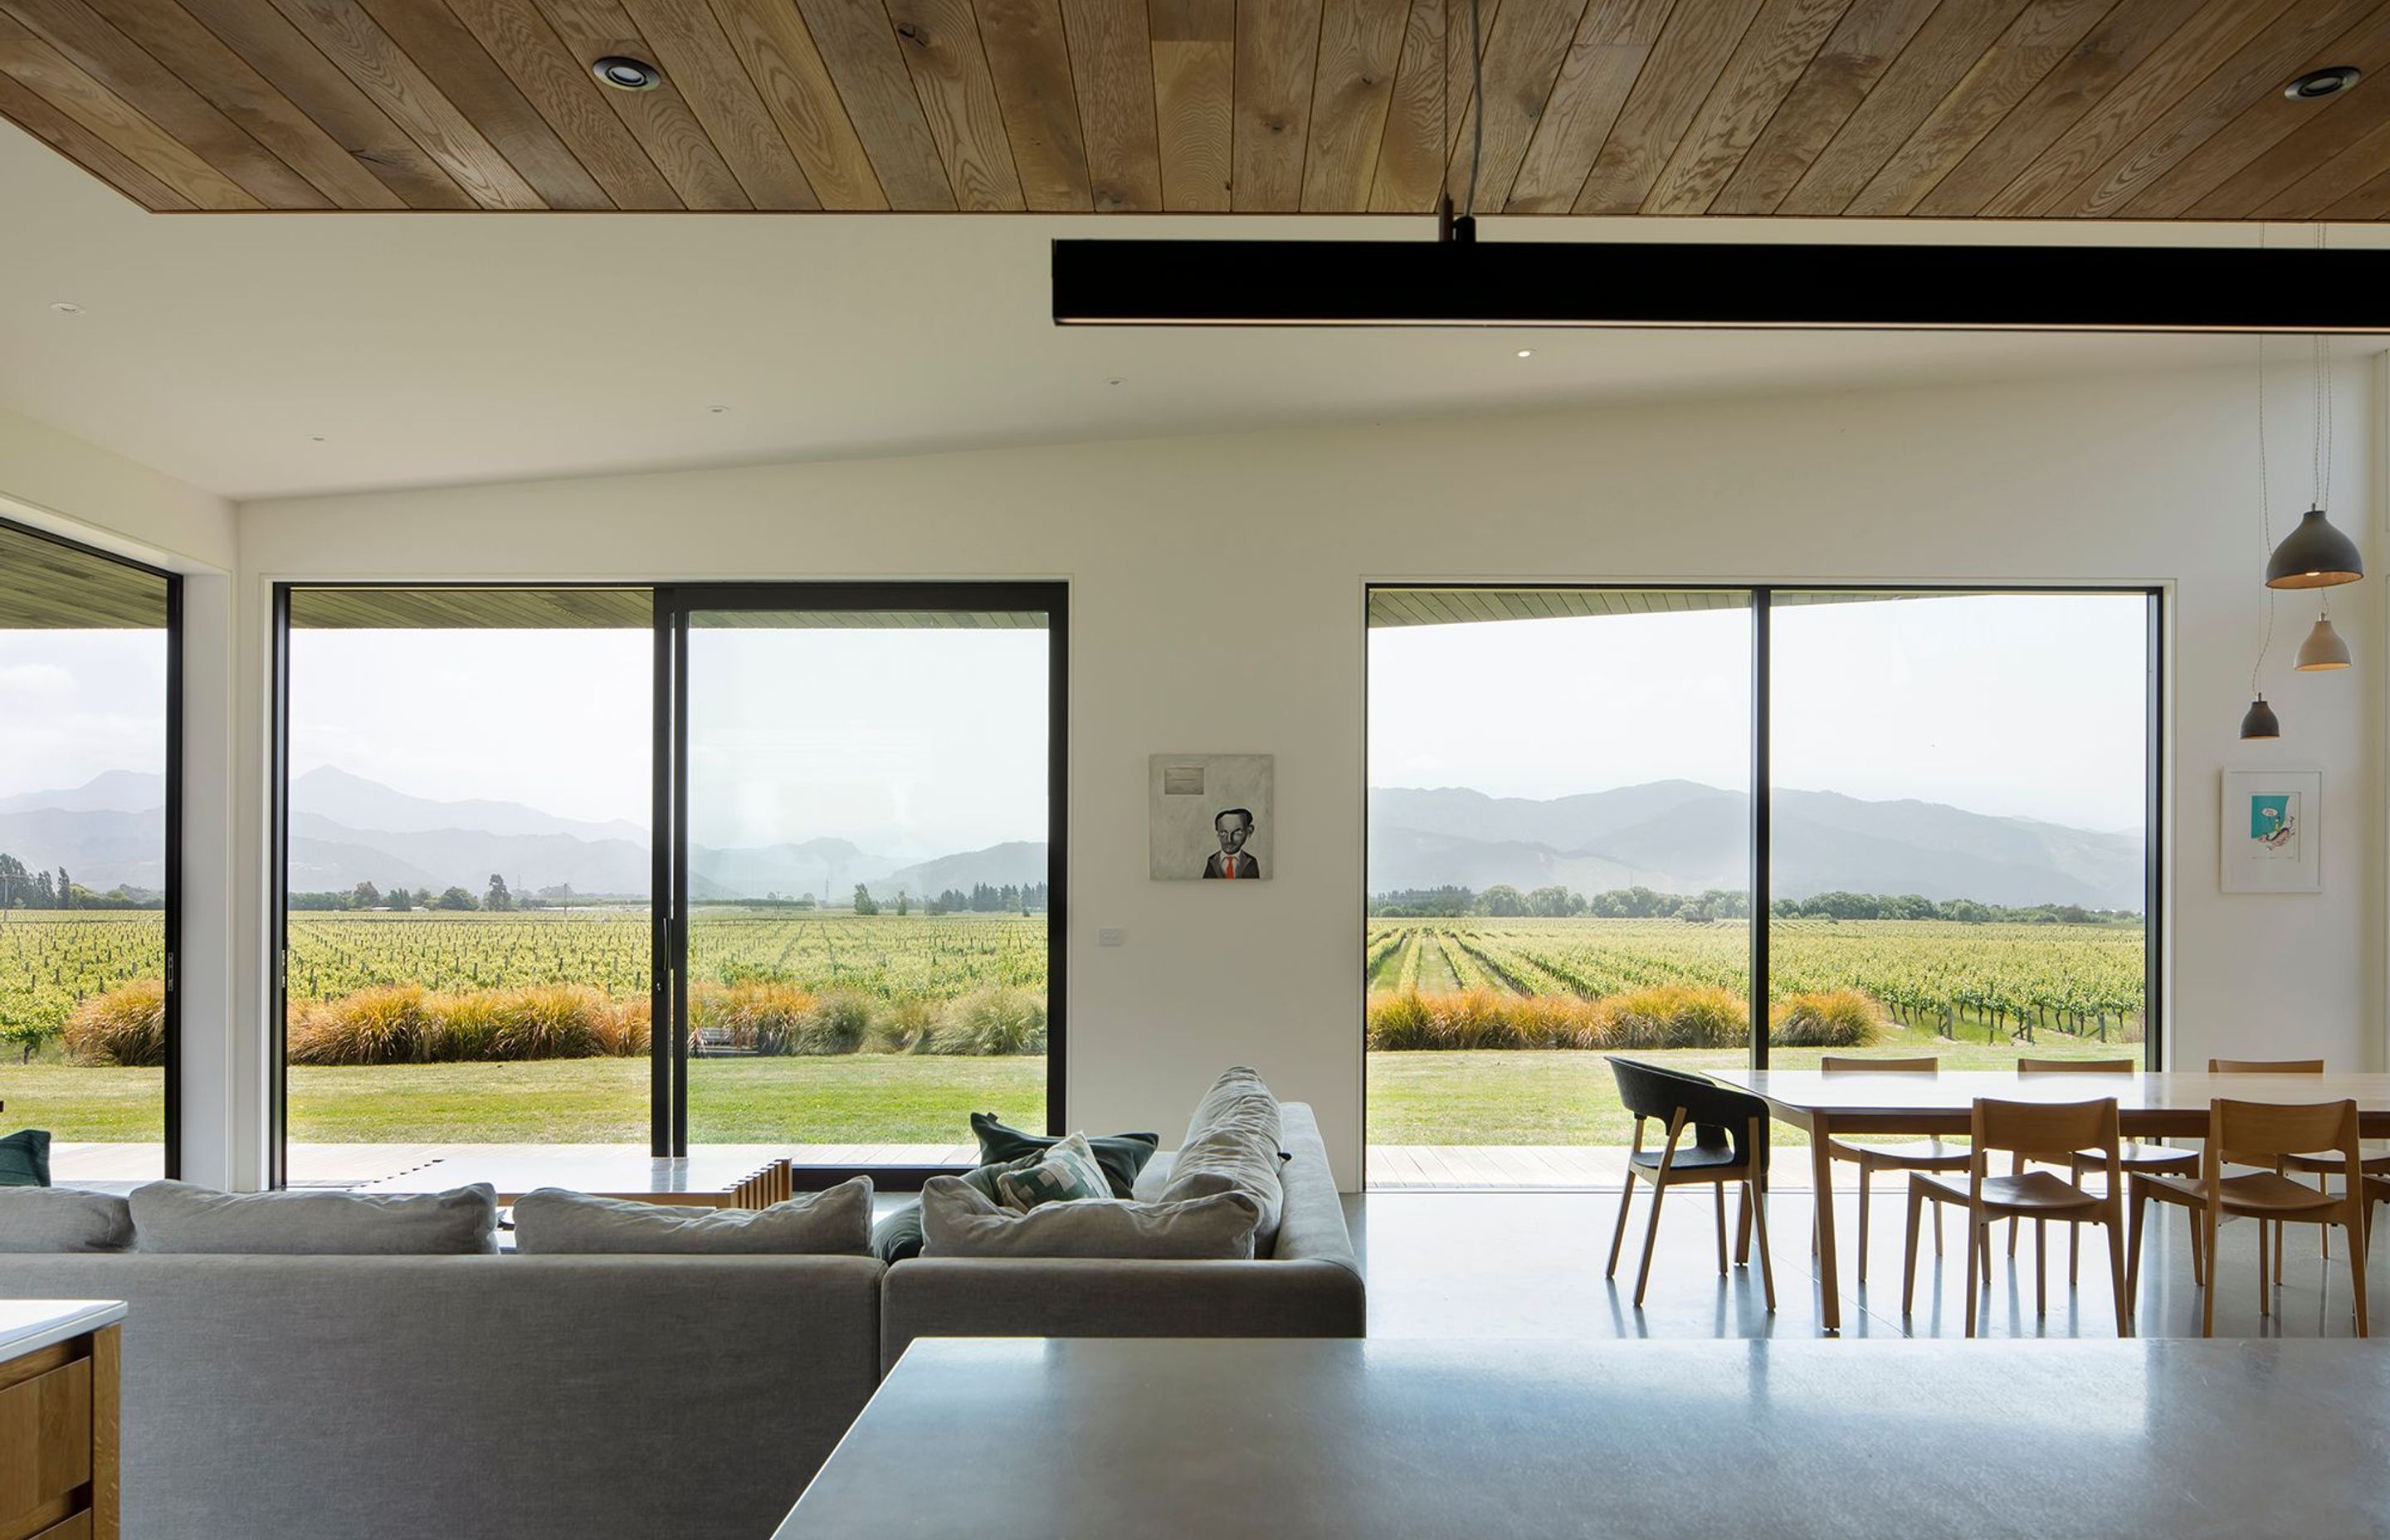 The living area of Vineyard House faces the grape vines and the afternoon sun.